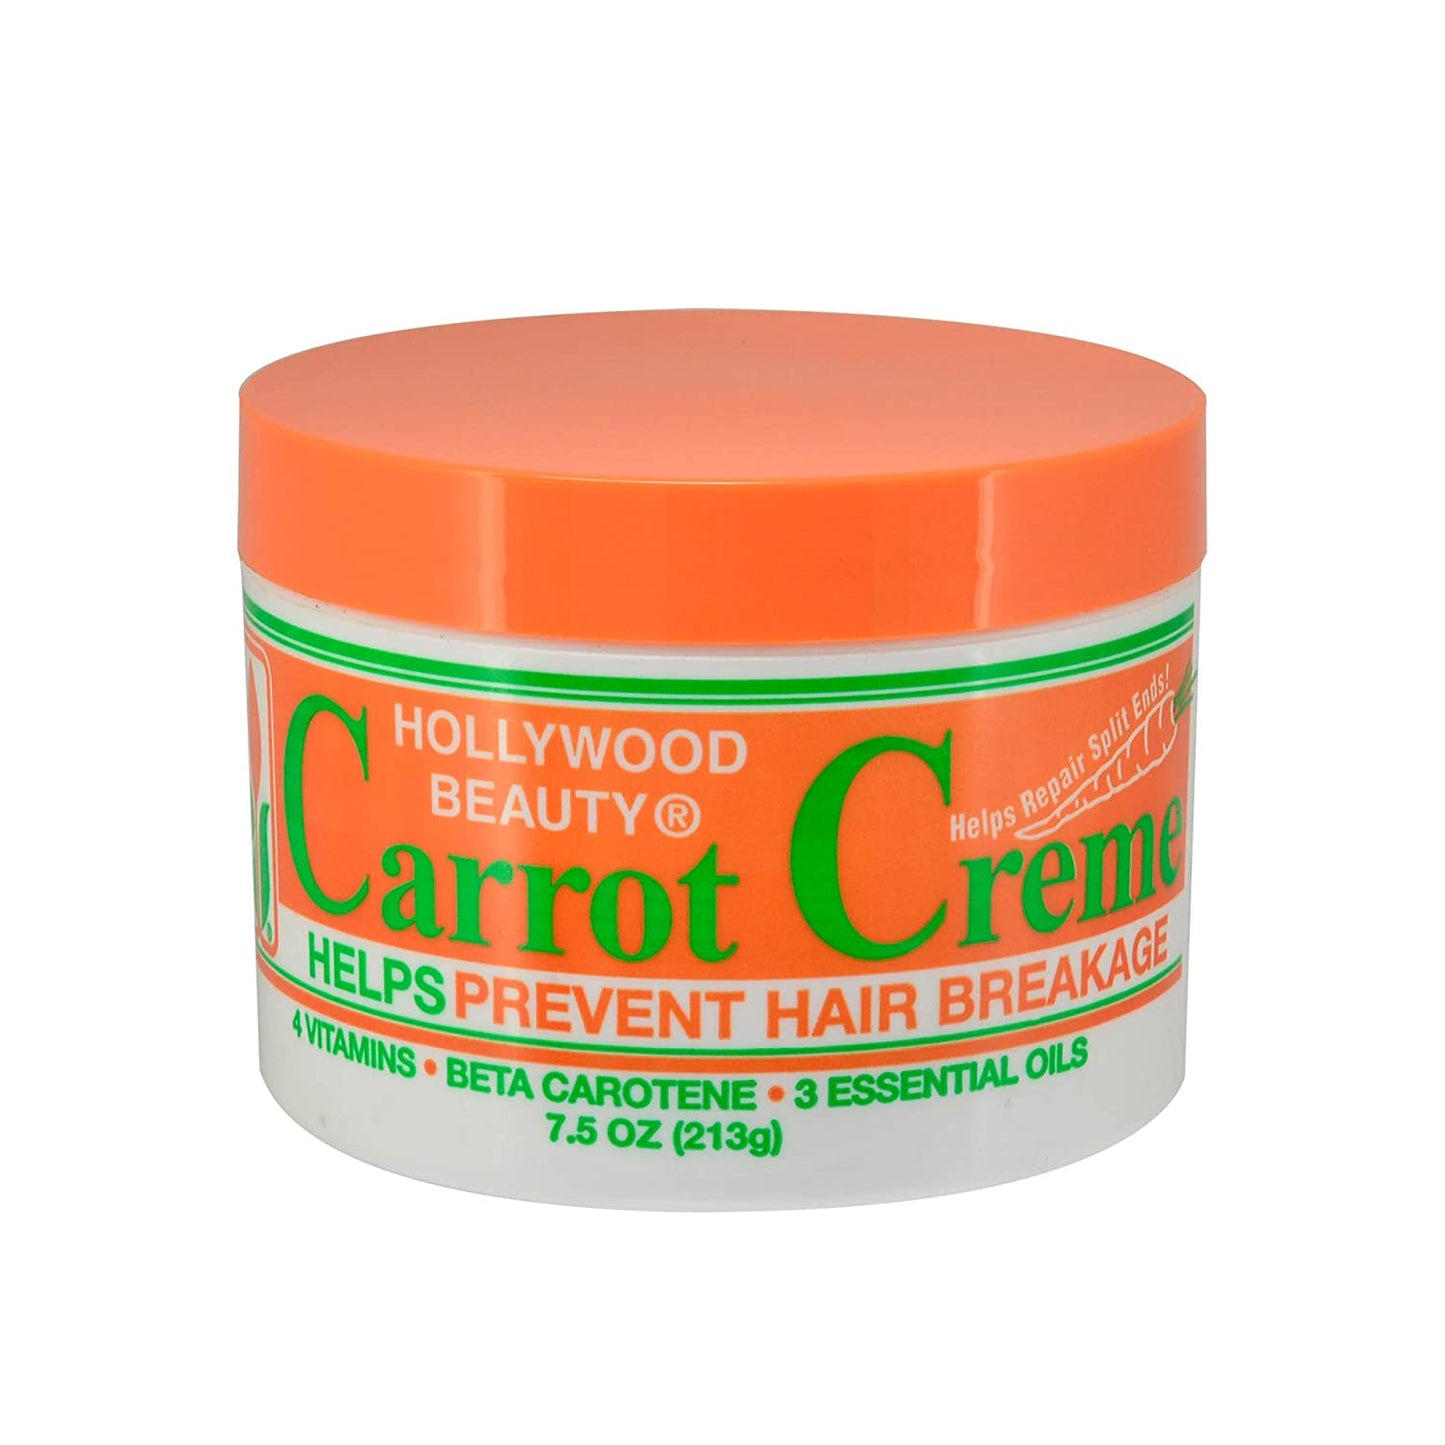 Hollywood Beauty: Carrot Creme